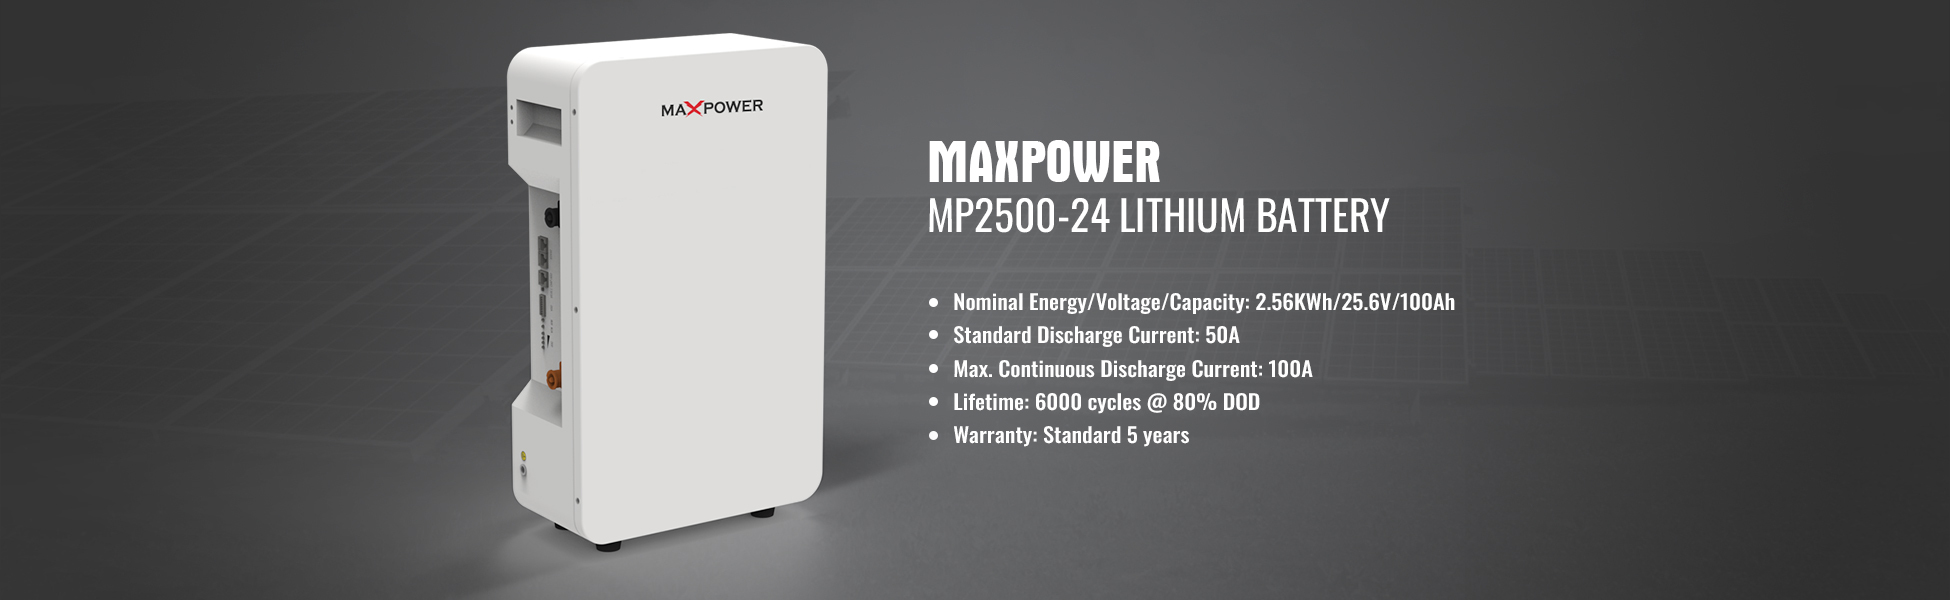 MP2500-24 Lithium Battery